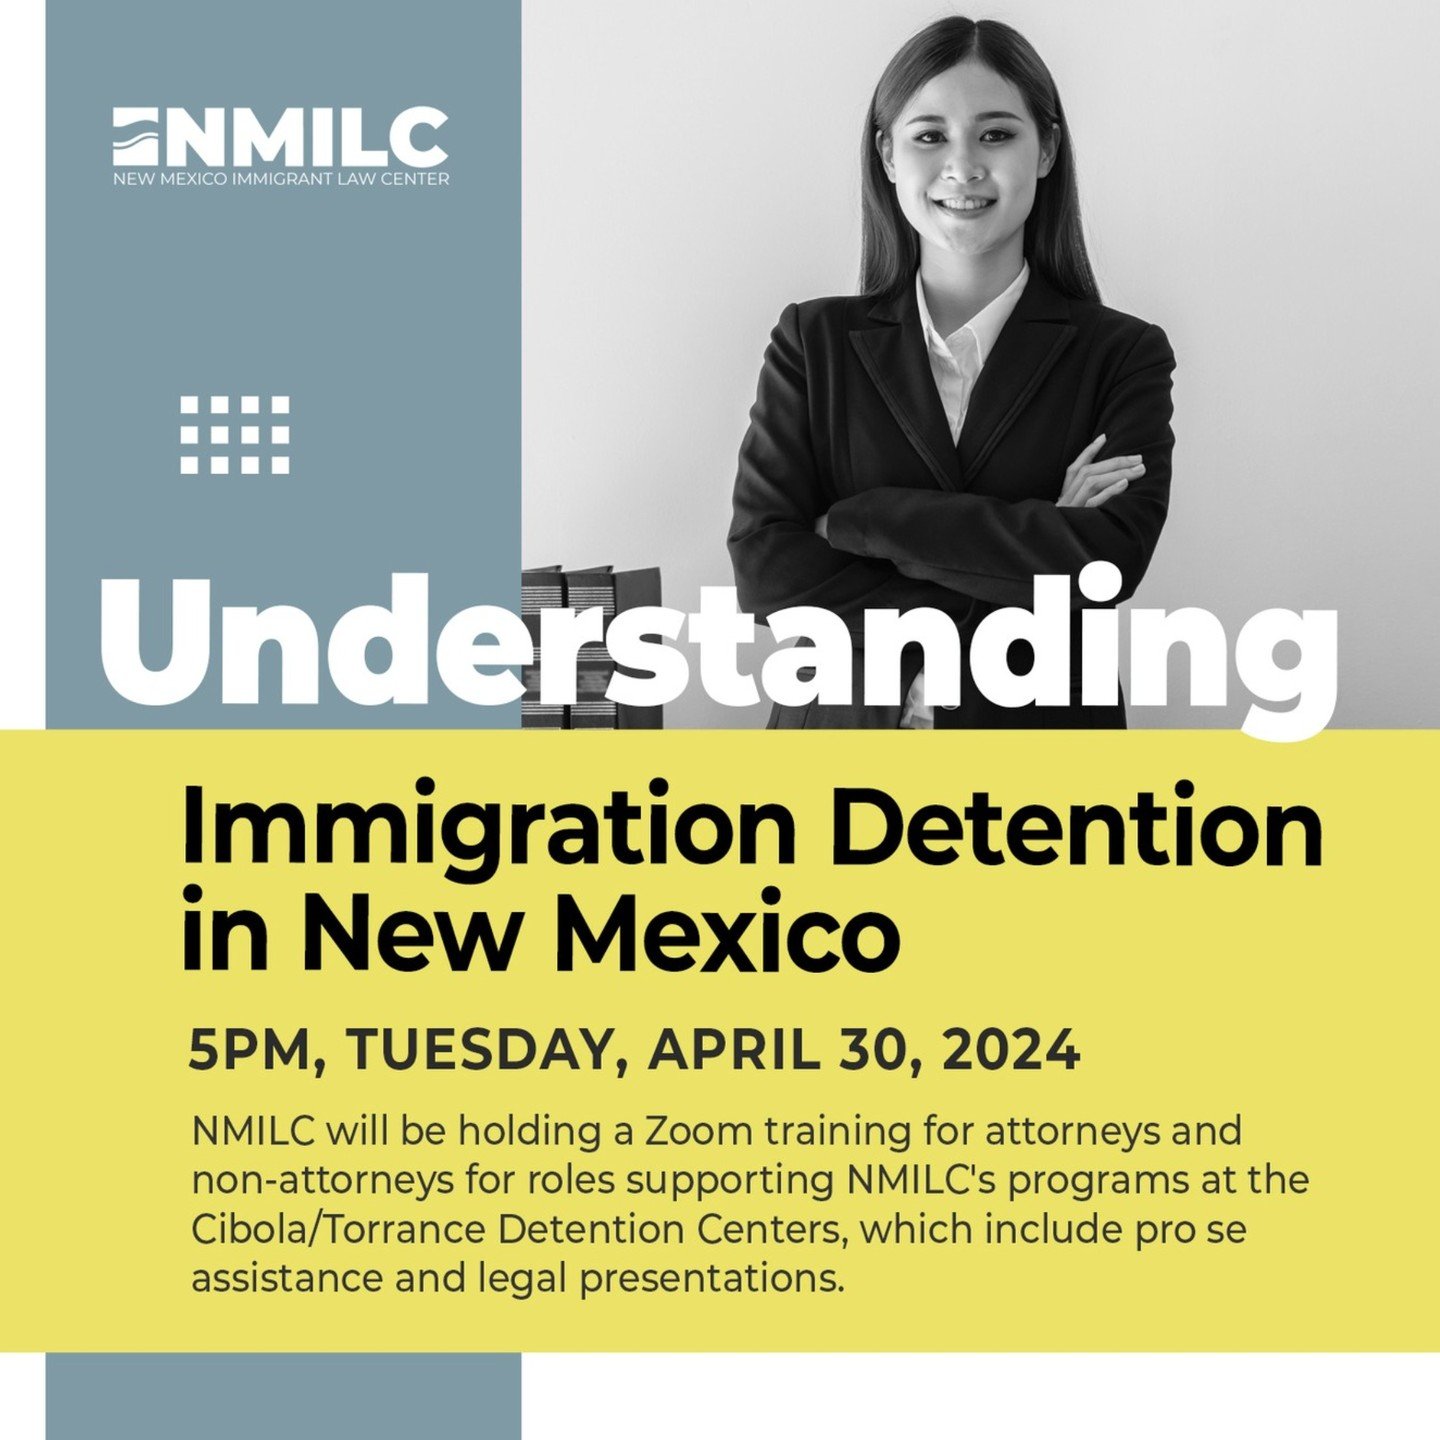 Just a friendly reminder to attend NMILC's Understanding Immigration Detention in New Mexico volunteer training session today at 5pm via Zoom. This session is for attorneys and non-attorneys for roles supporting NMILC's programs at the Cibola/Torranc